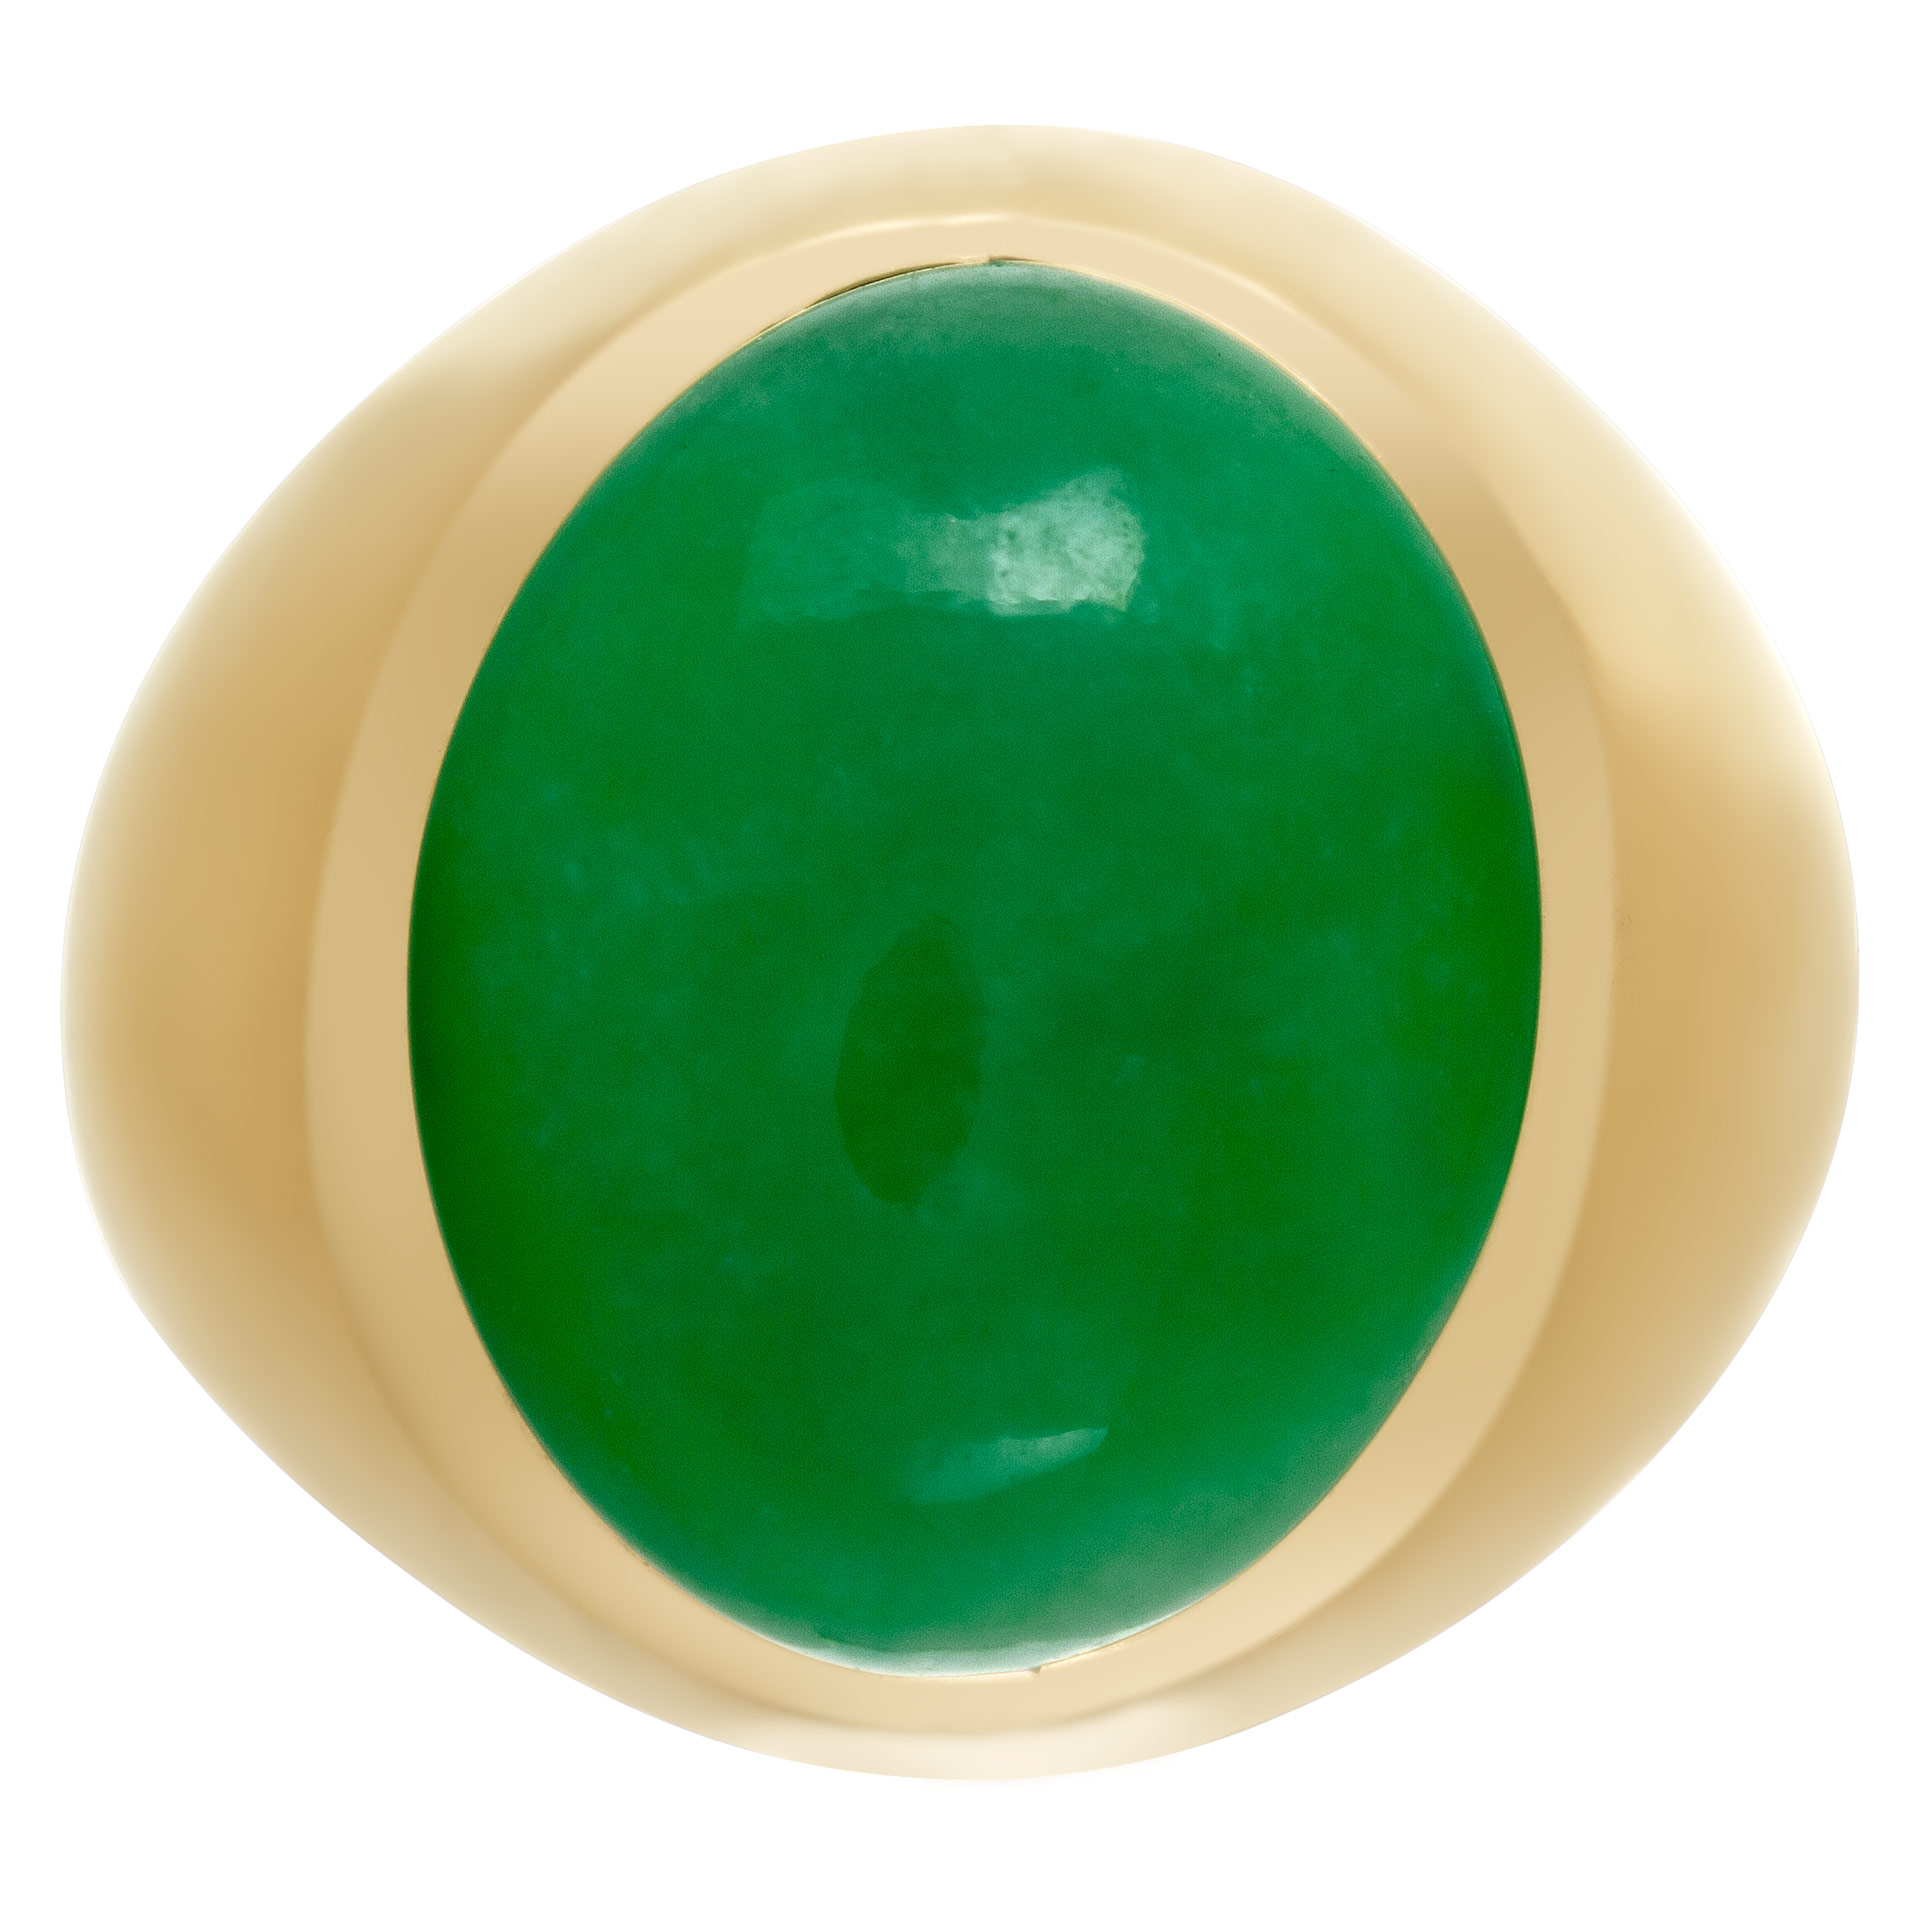 Jade cabachon "Apple" ring in 18k yellow gold